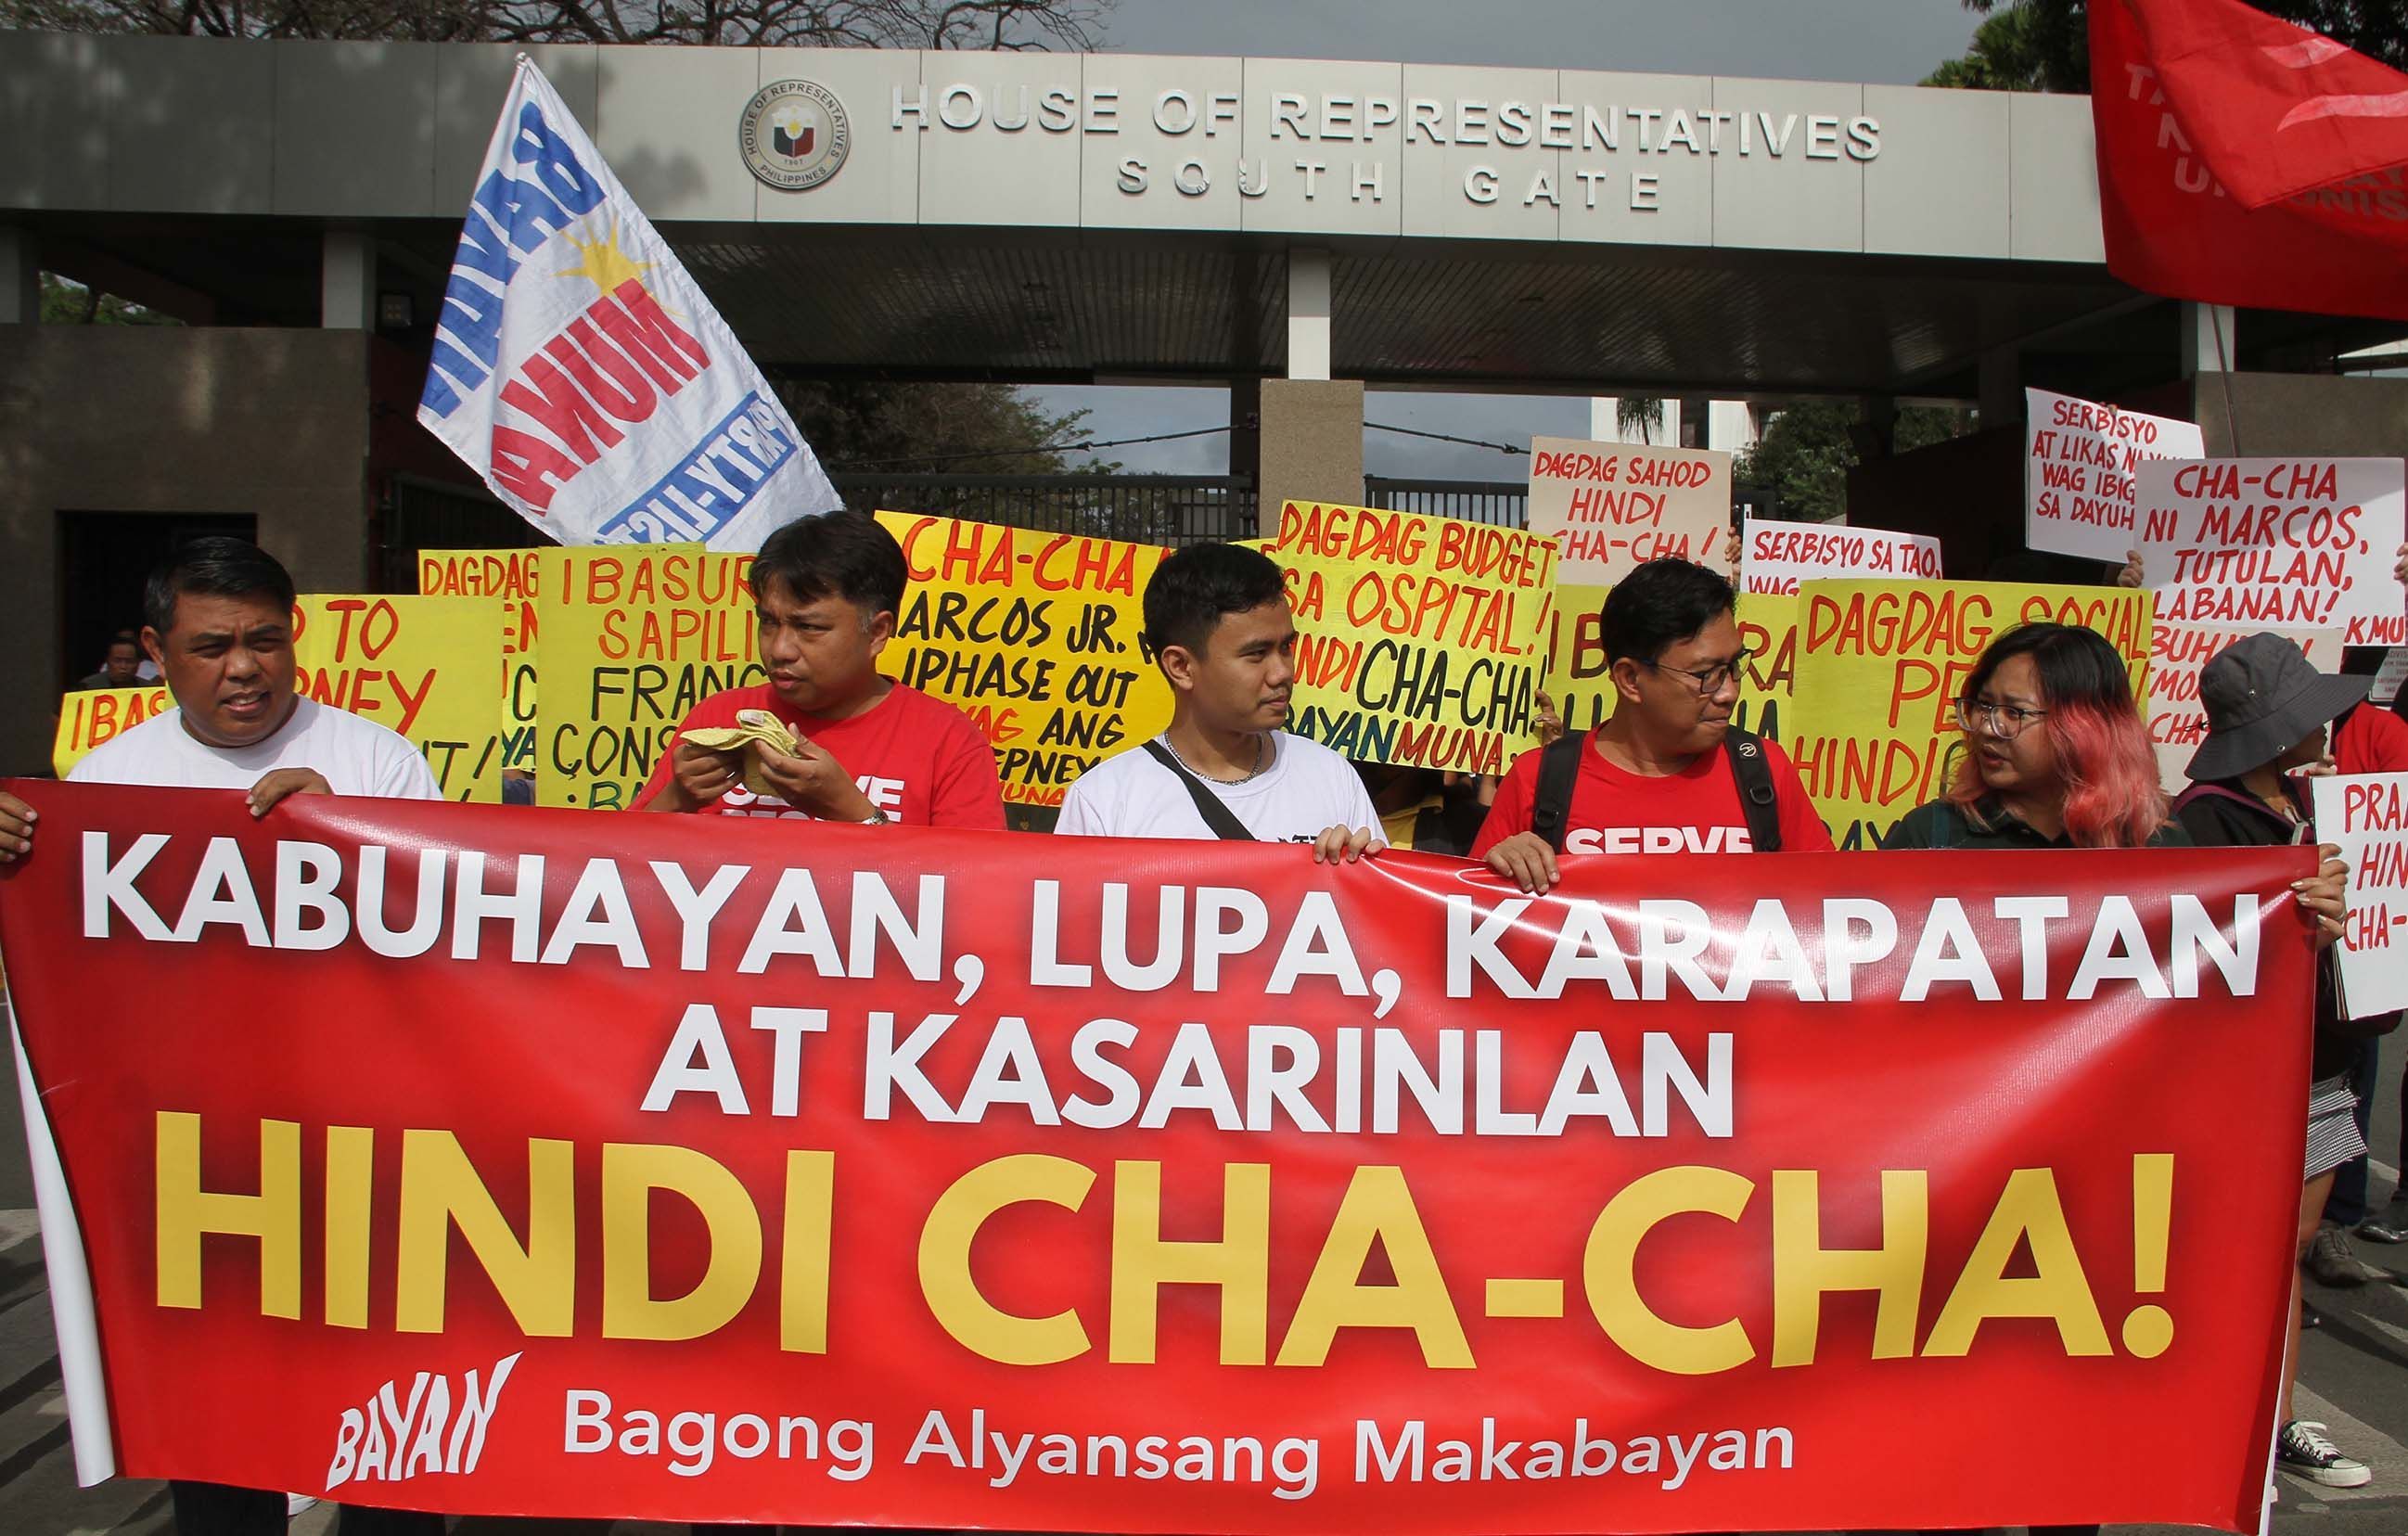 GROUPS STAGE RALLY AGAINST CHA-CHA